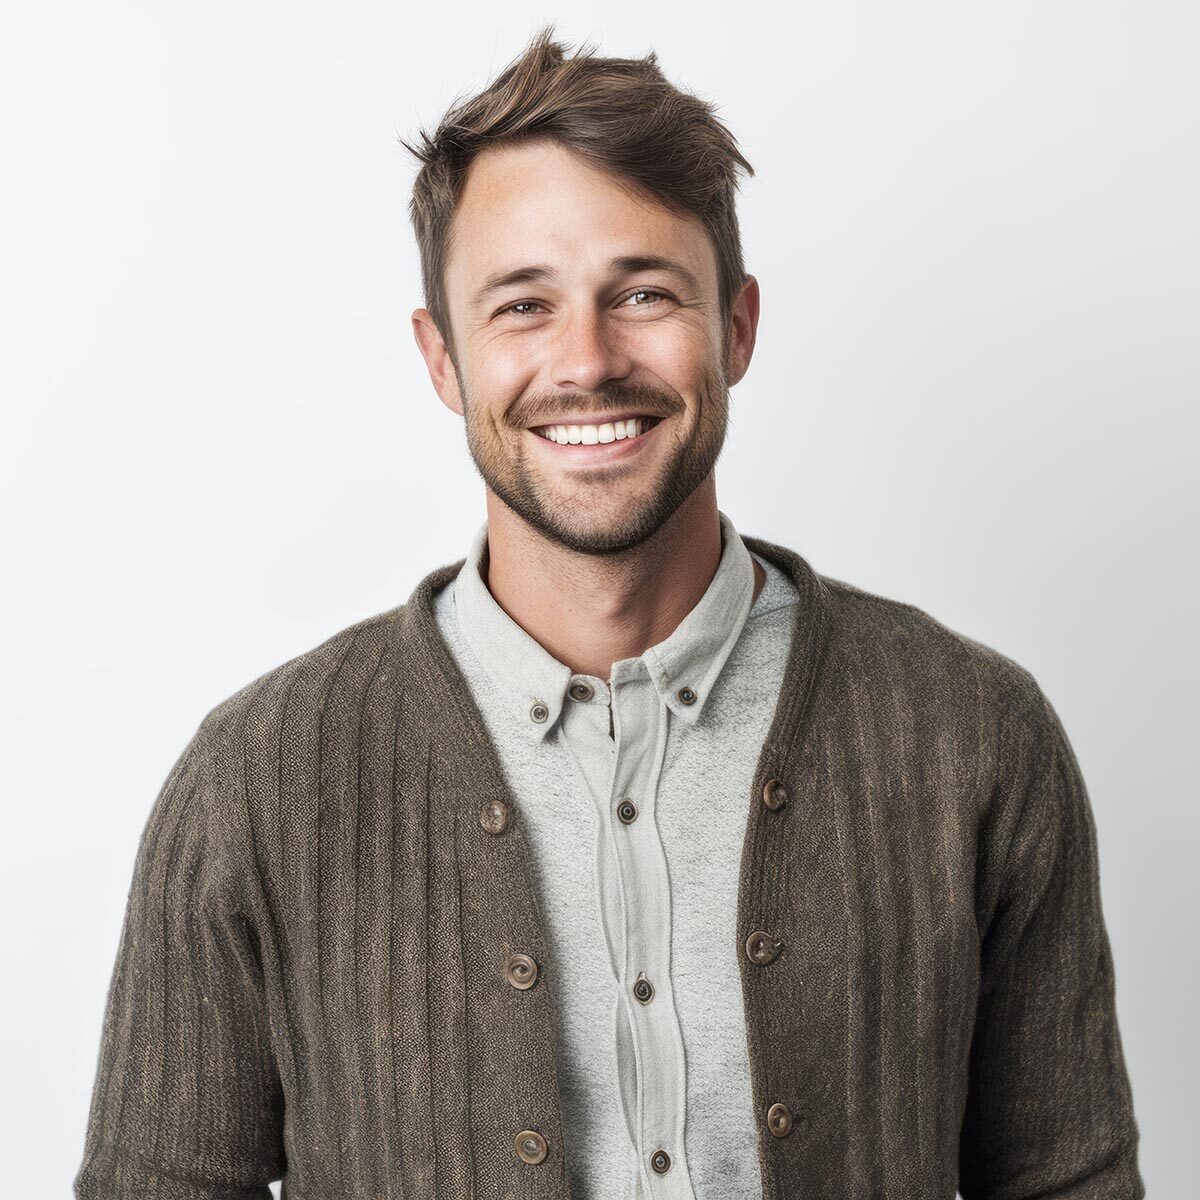 Smiling man in a brown cardigan and grey shirt.